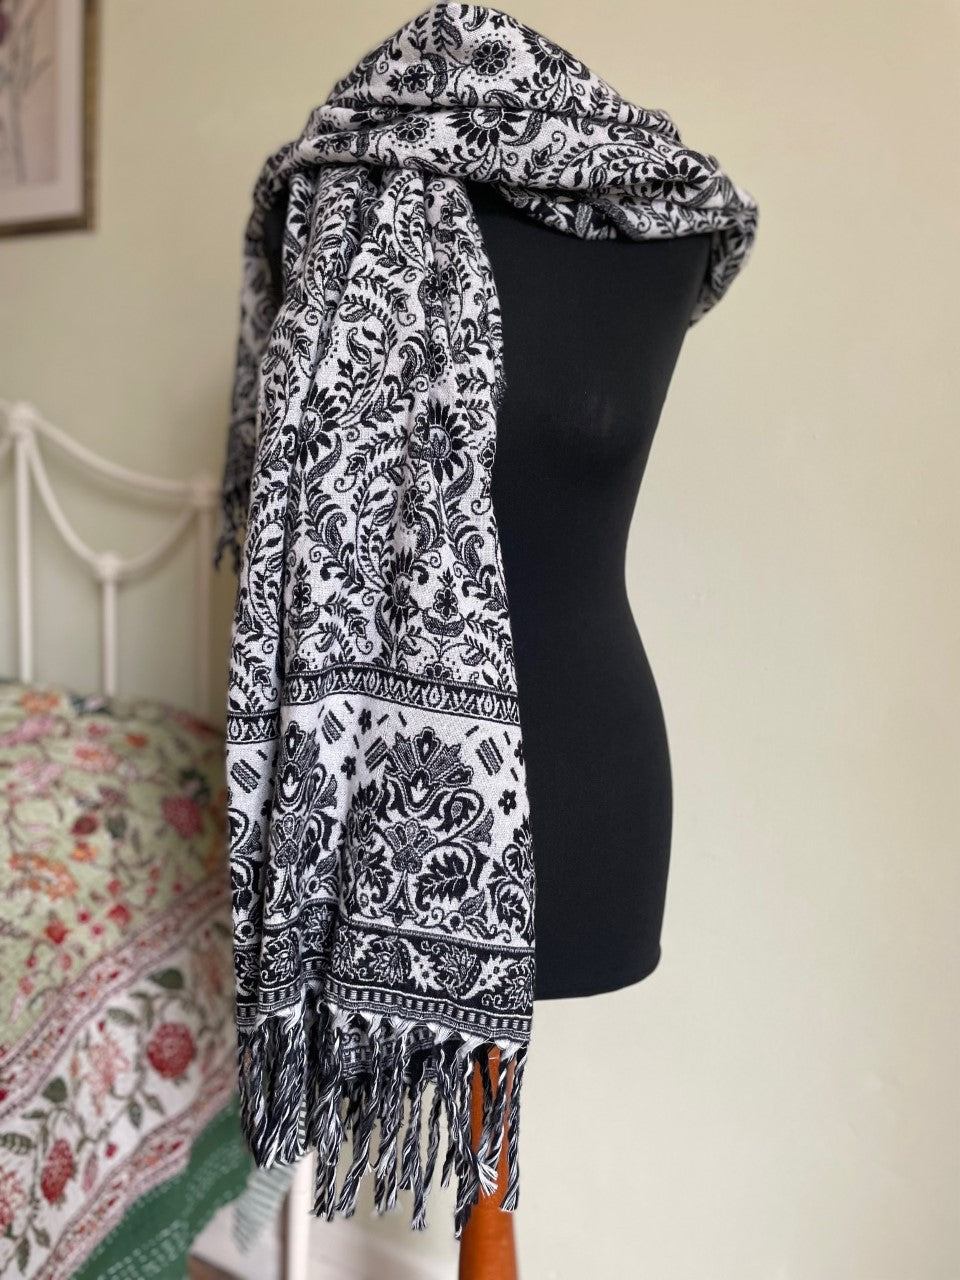 New in Black and White Paisley Blanket Shawl! Buy online from Emma's Emporium